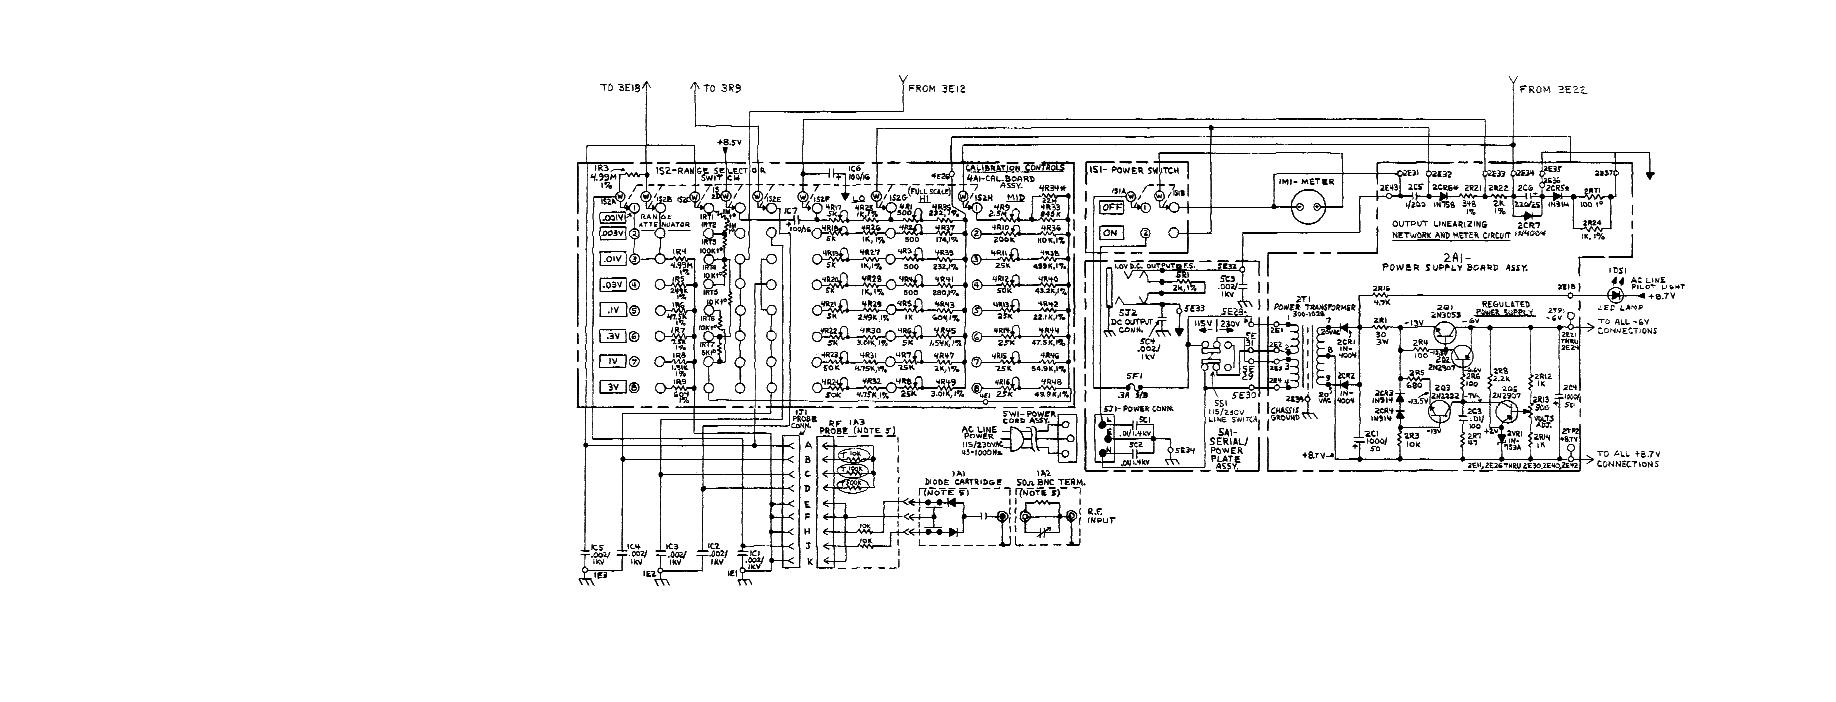 FO-2. SCHEMATIC DIAGRAM OF POWER SUPPLY BOARD ASSEMBLY, RANGE SWITCH